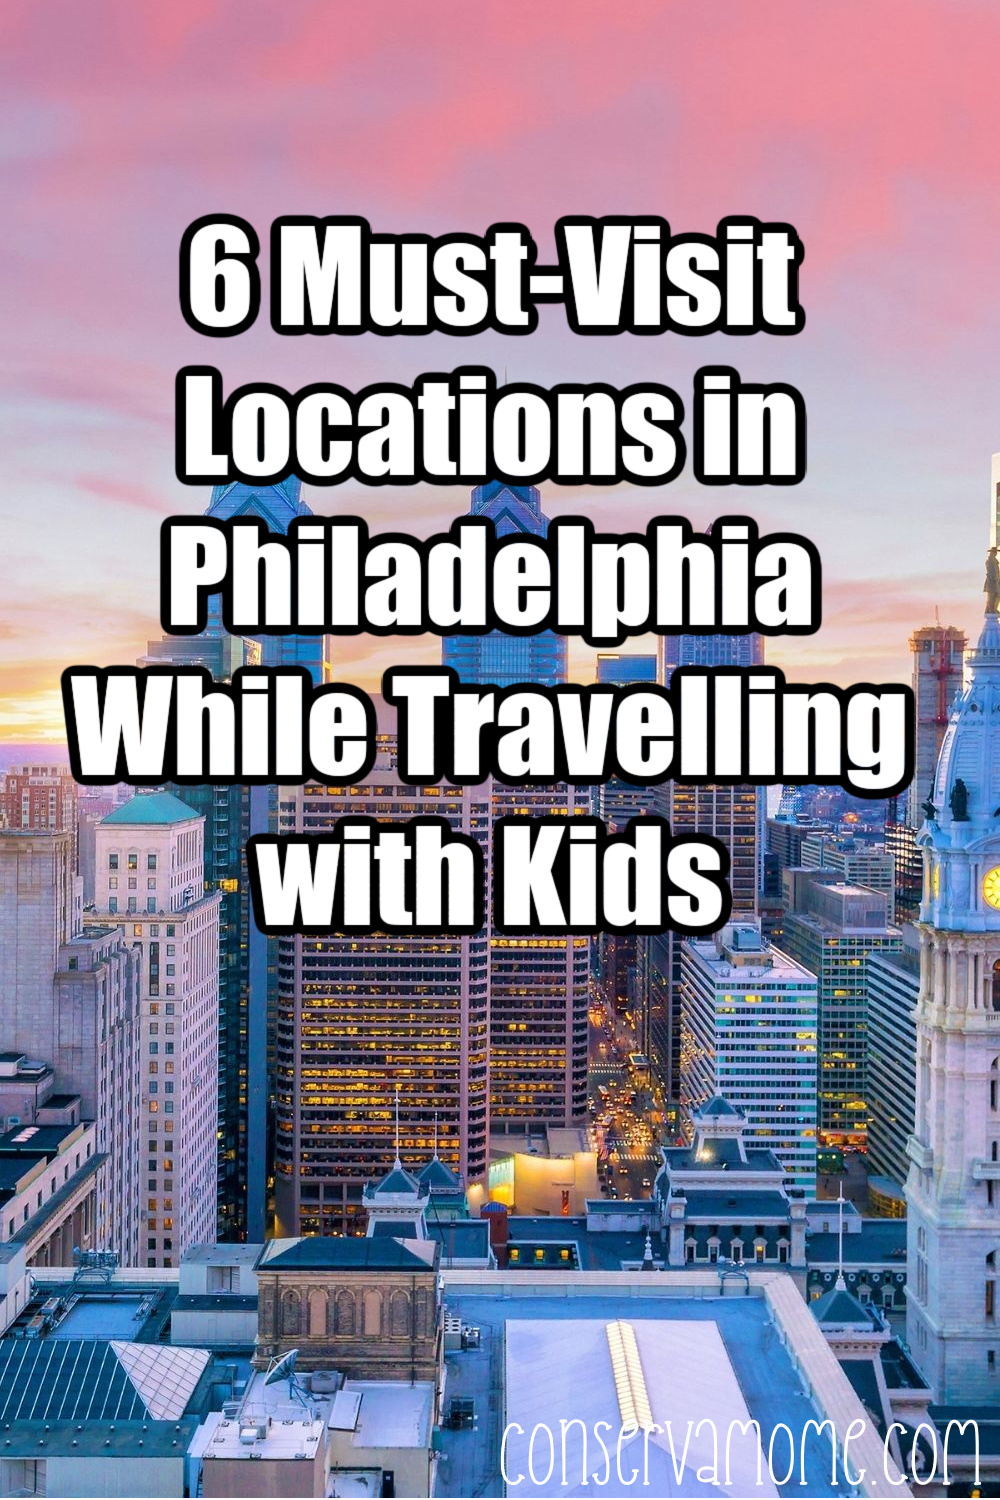 6 Must-Visit Locations in Philadelphia While Travelling with Kids